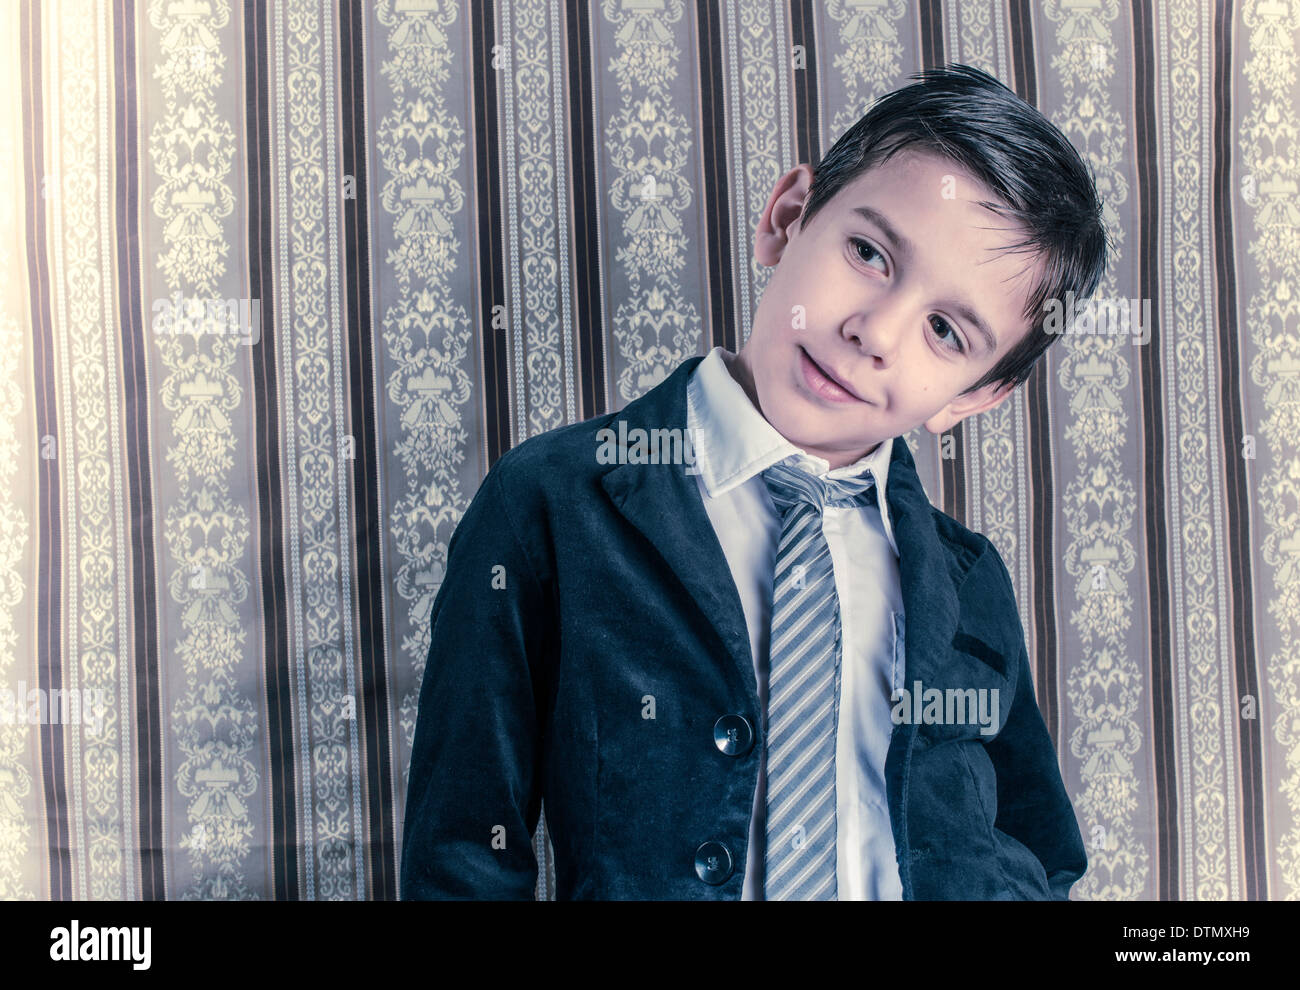 Boy in vintage black suit and tie Stock Photo